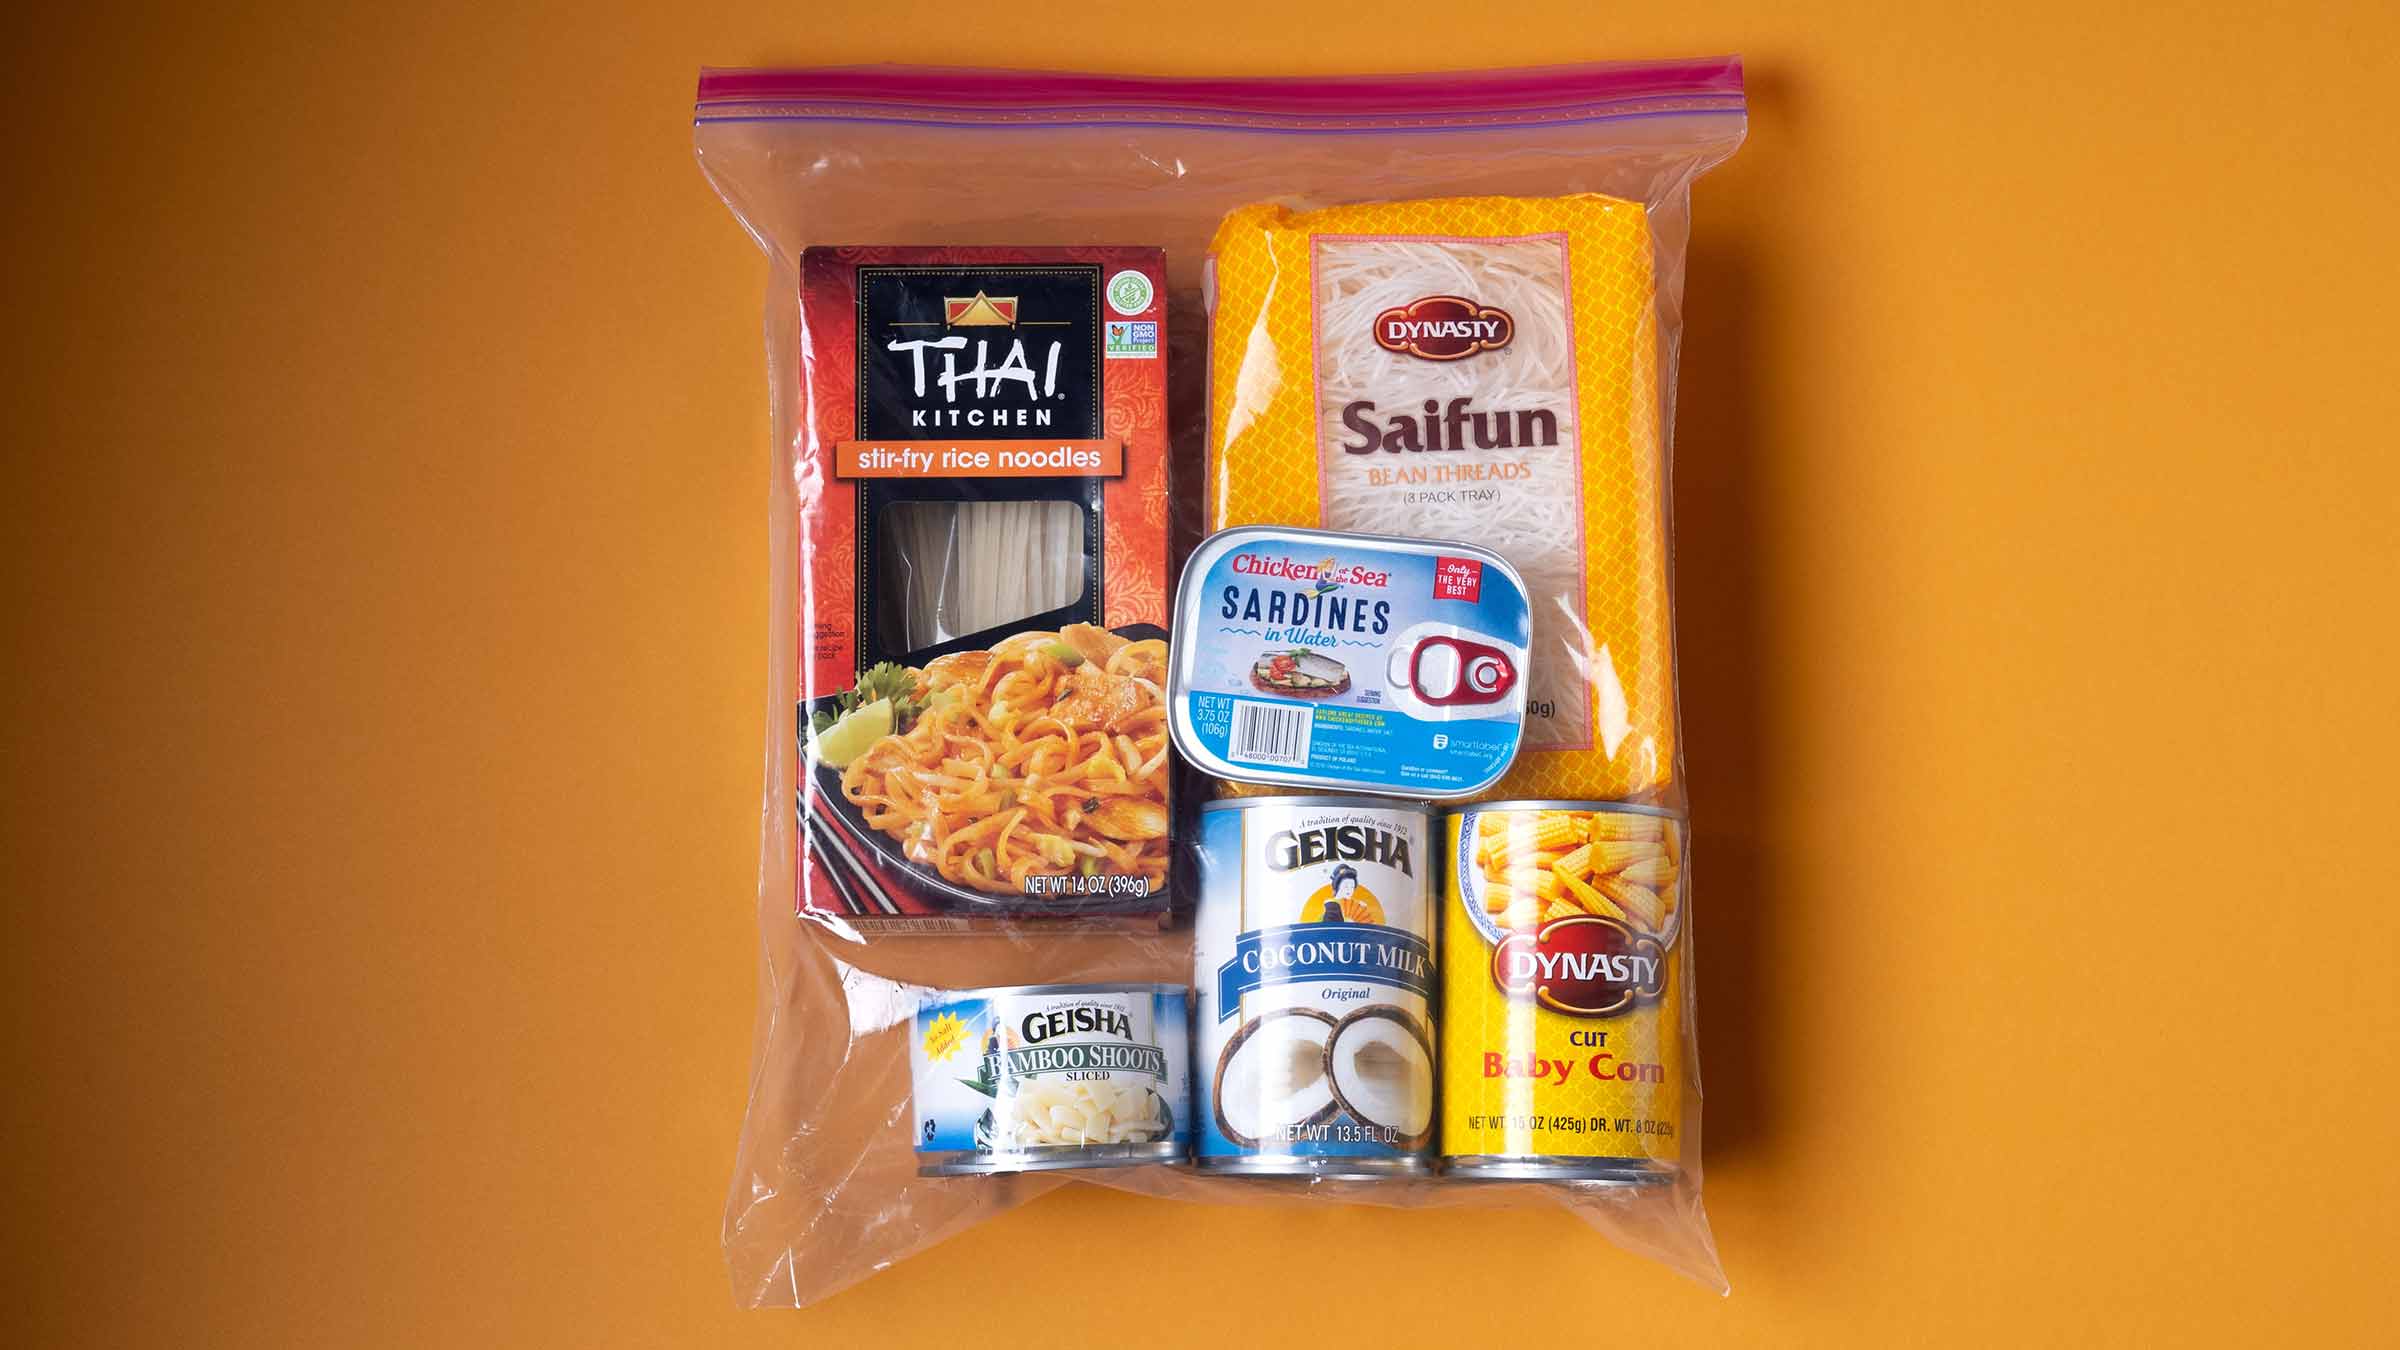 A Ziploc bag is filled with staple ingredients in the East Asian diet including rice noodles, baby corn, and coconut milk